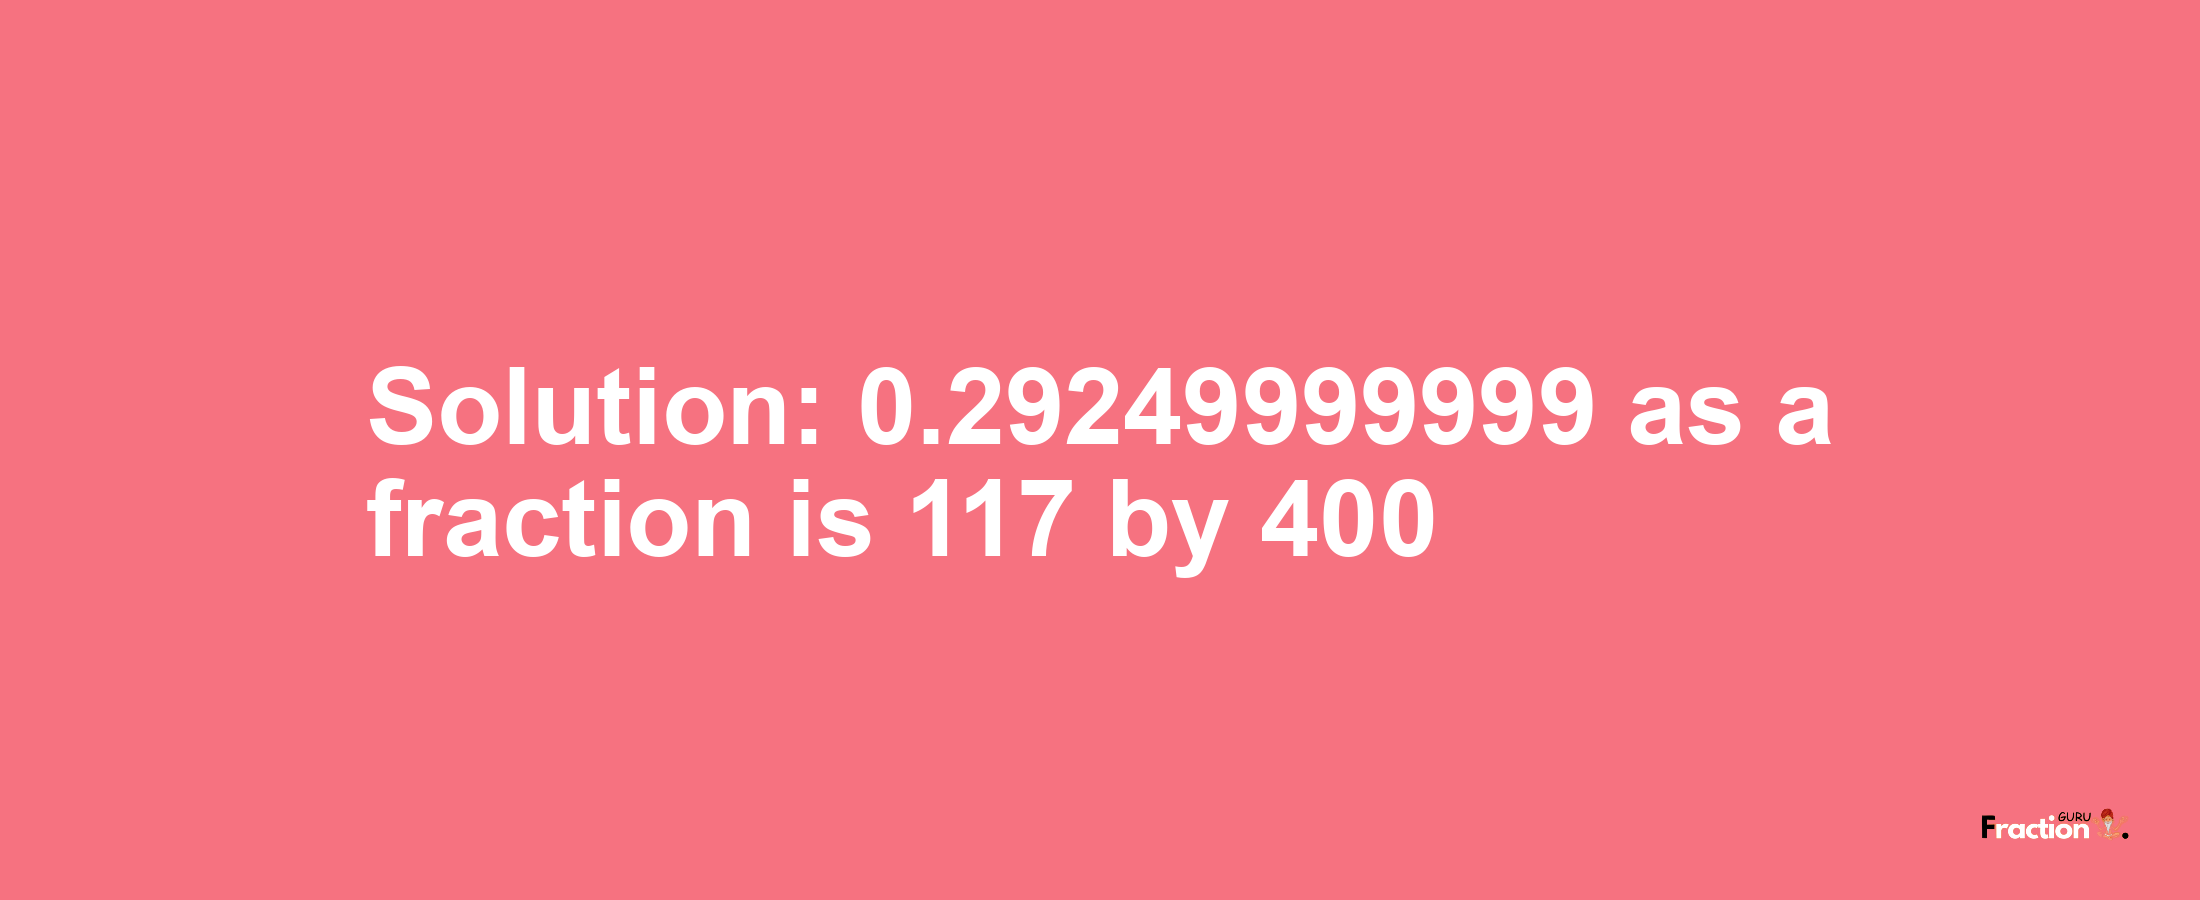 Solution:0.29249999999 as a fraction is 117/400